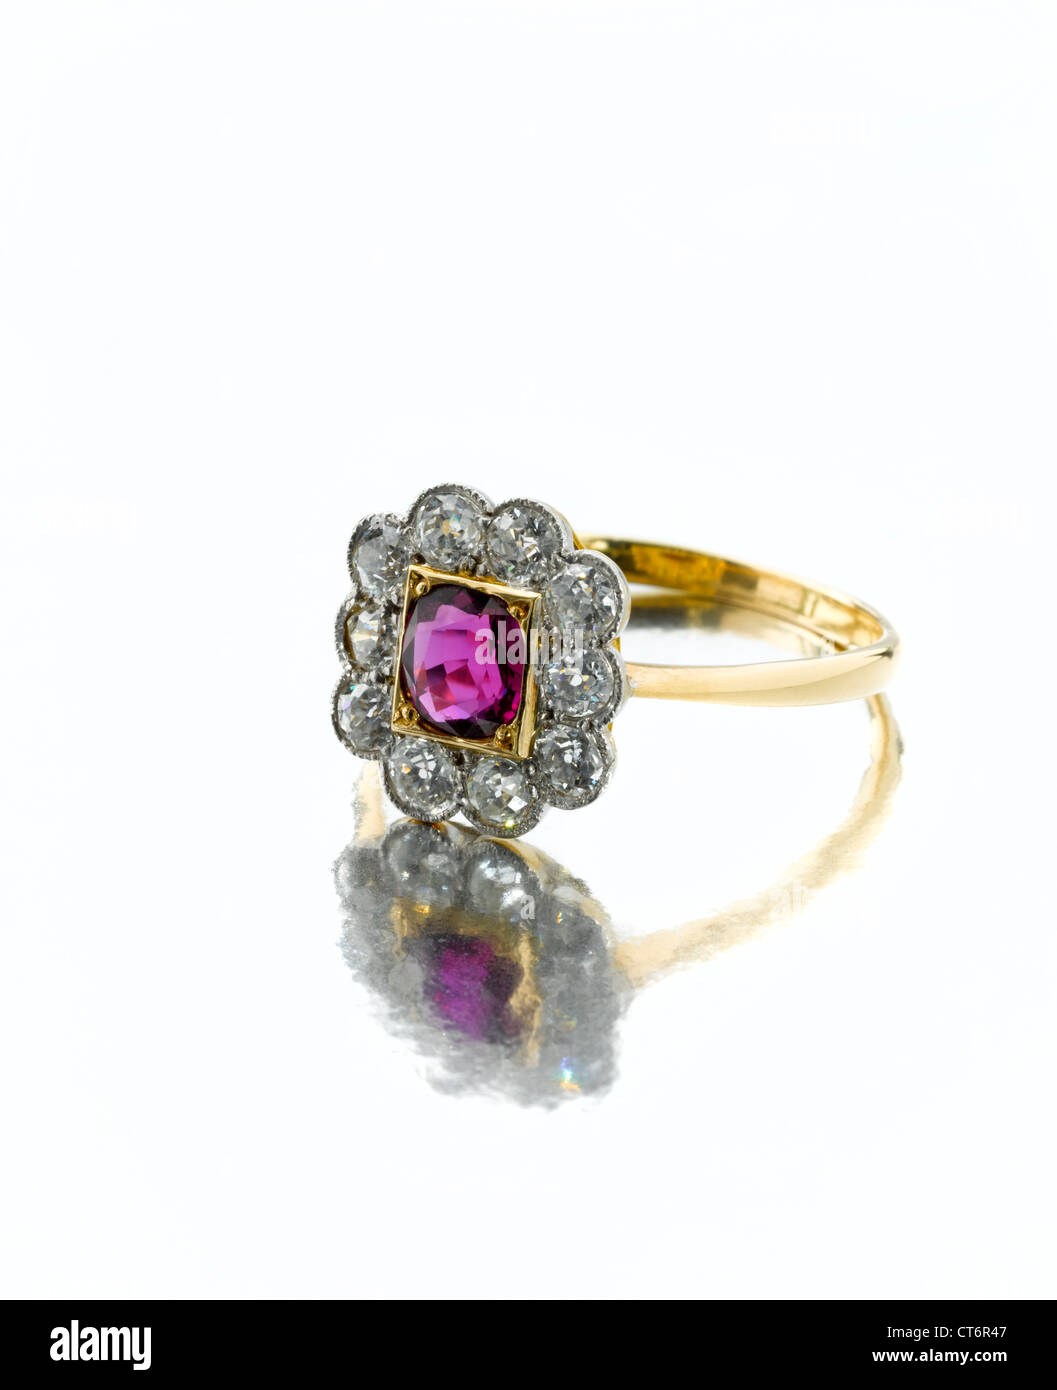 Burmese Myanmar gold ruby ring 'pigeon's blood' colour with diamonds. Stock Photo